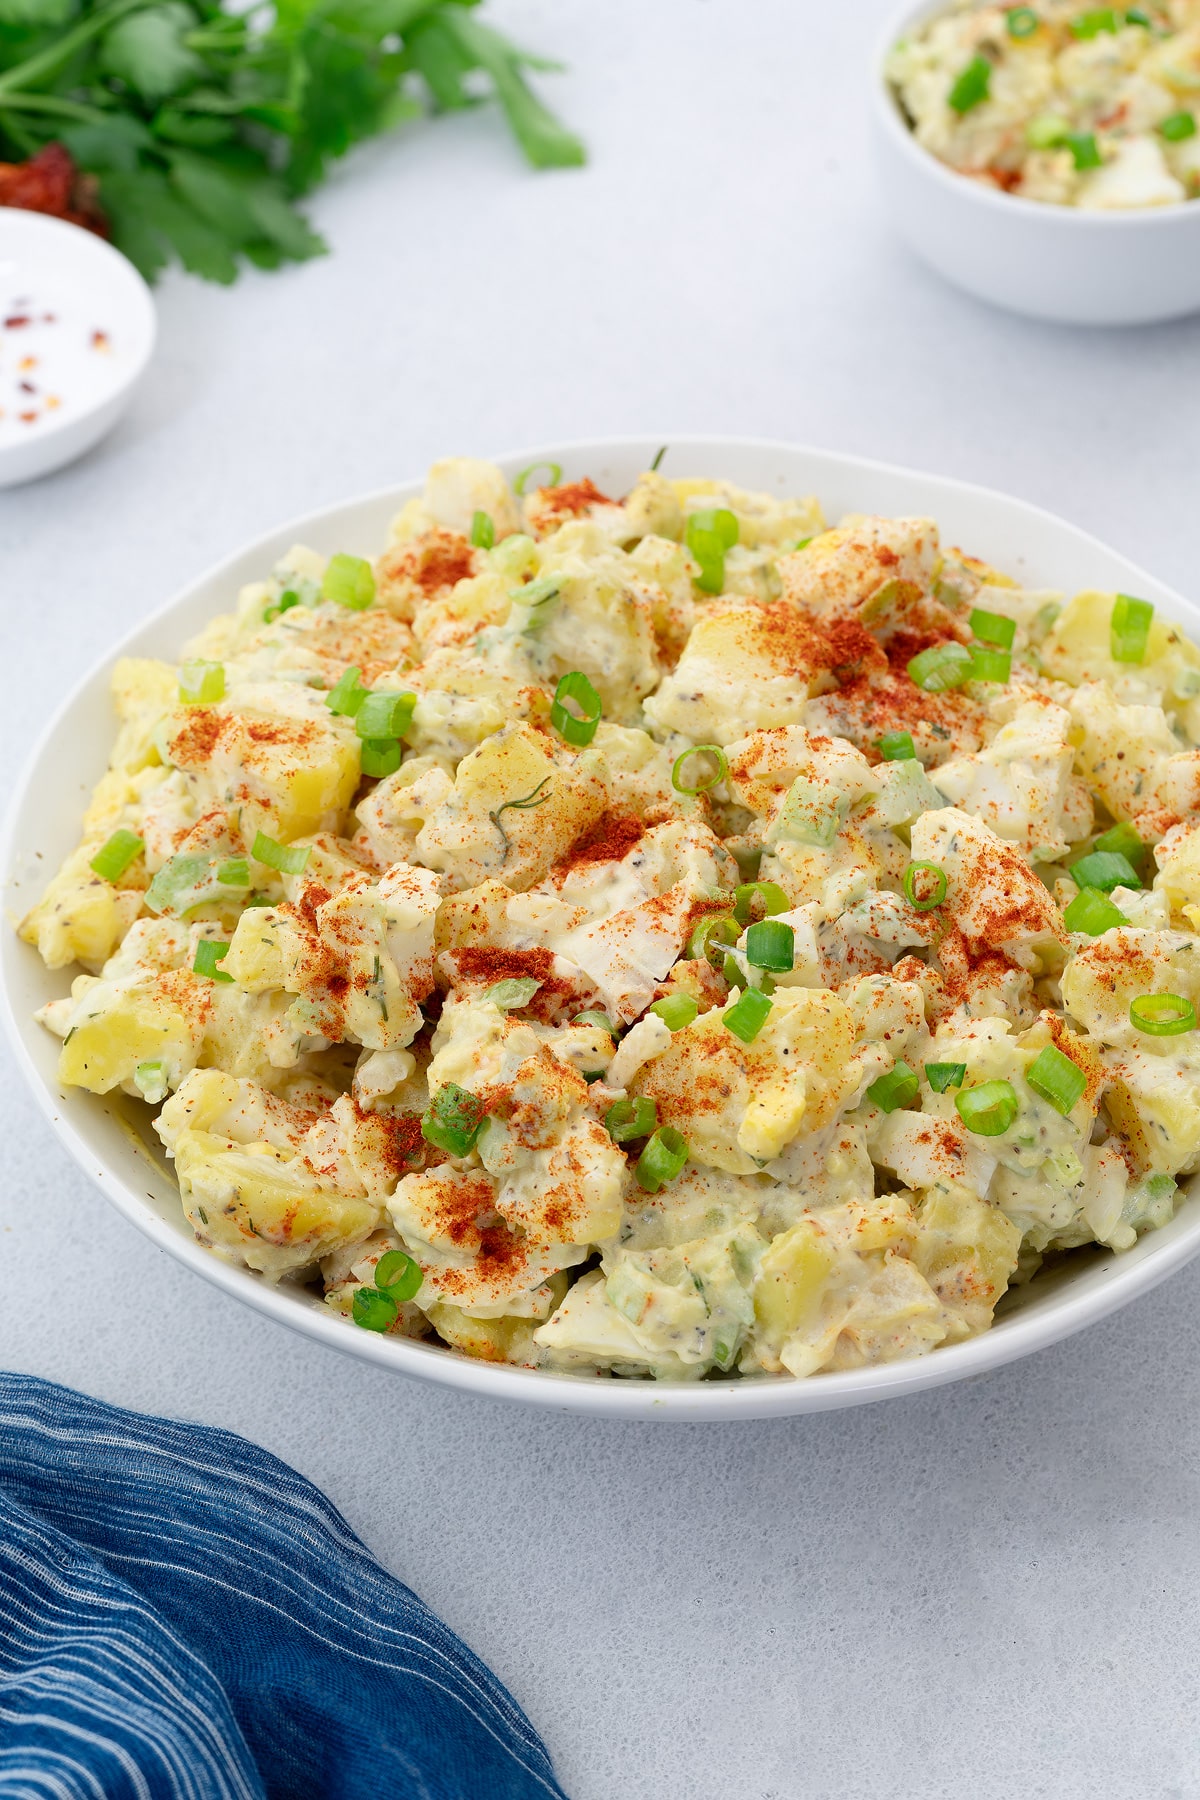 Delicious Homemade Potato Salad in a white bowl, garnished with a sprinkle of paprika and fresh spring onions, served on a white table.